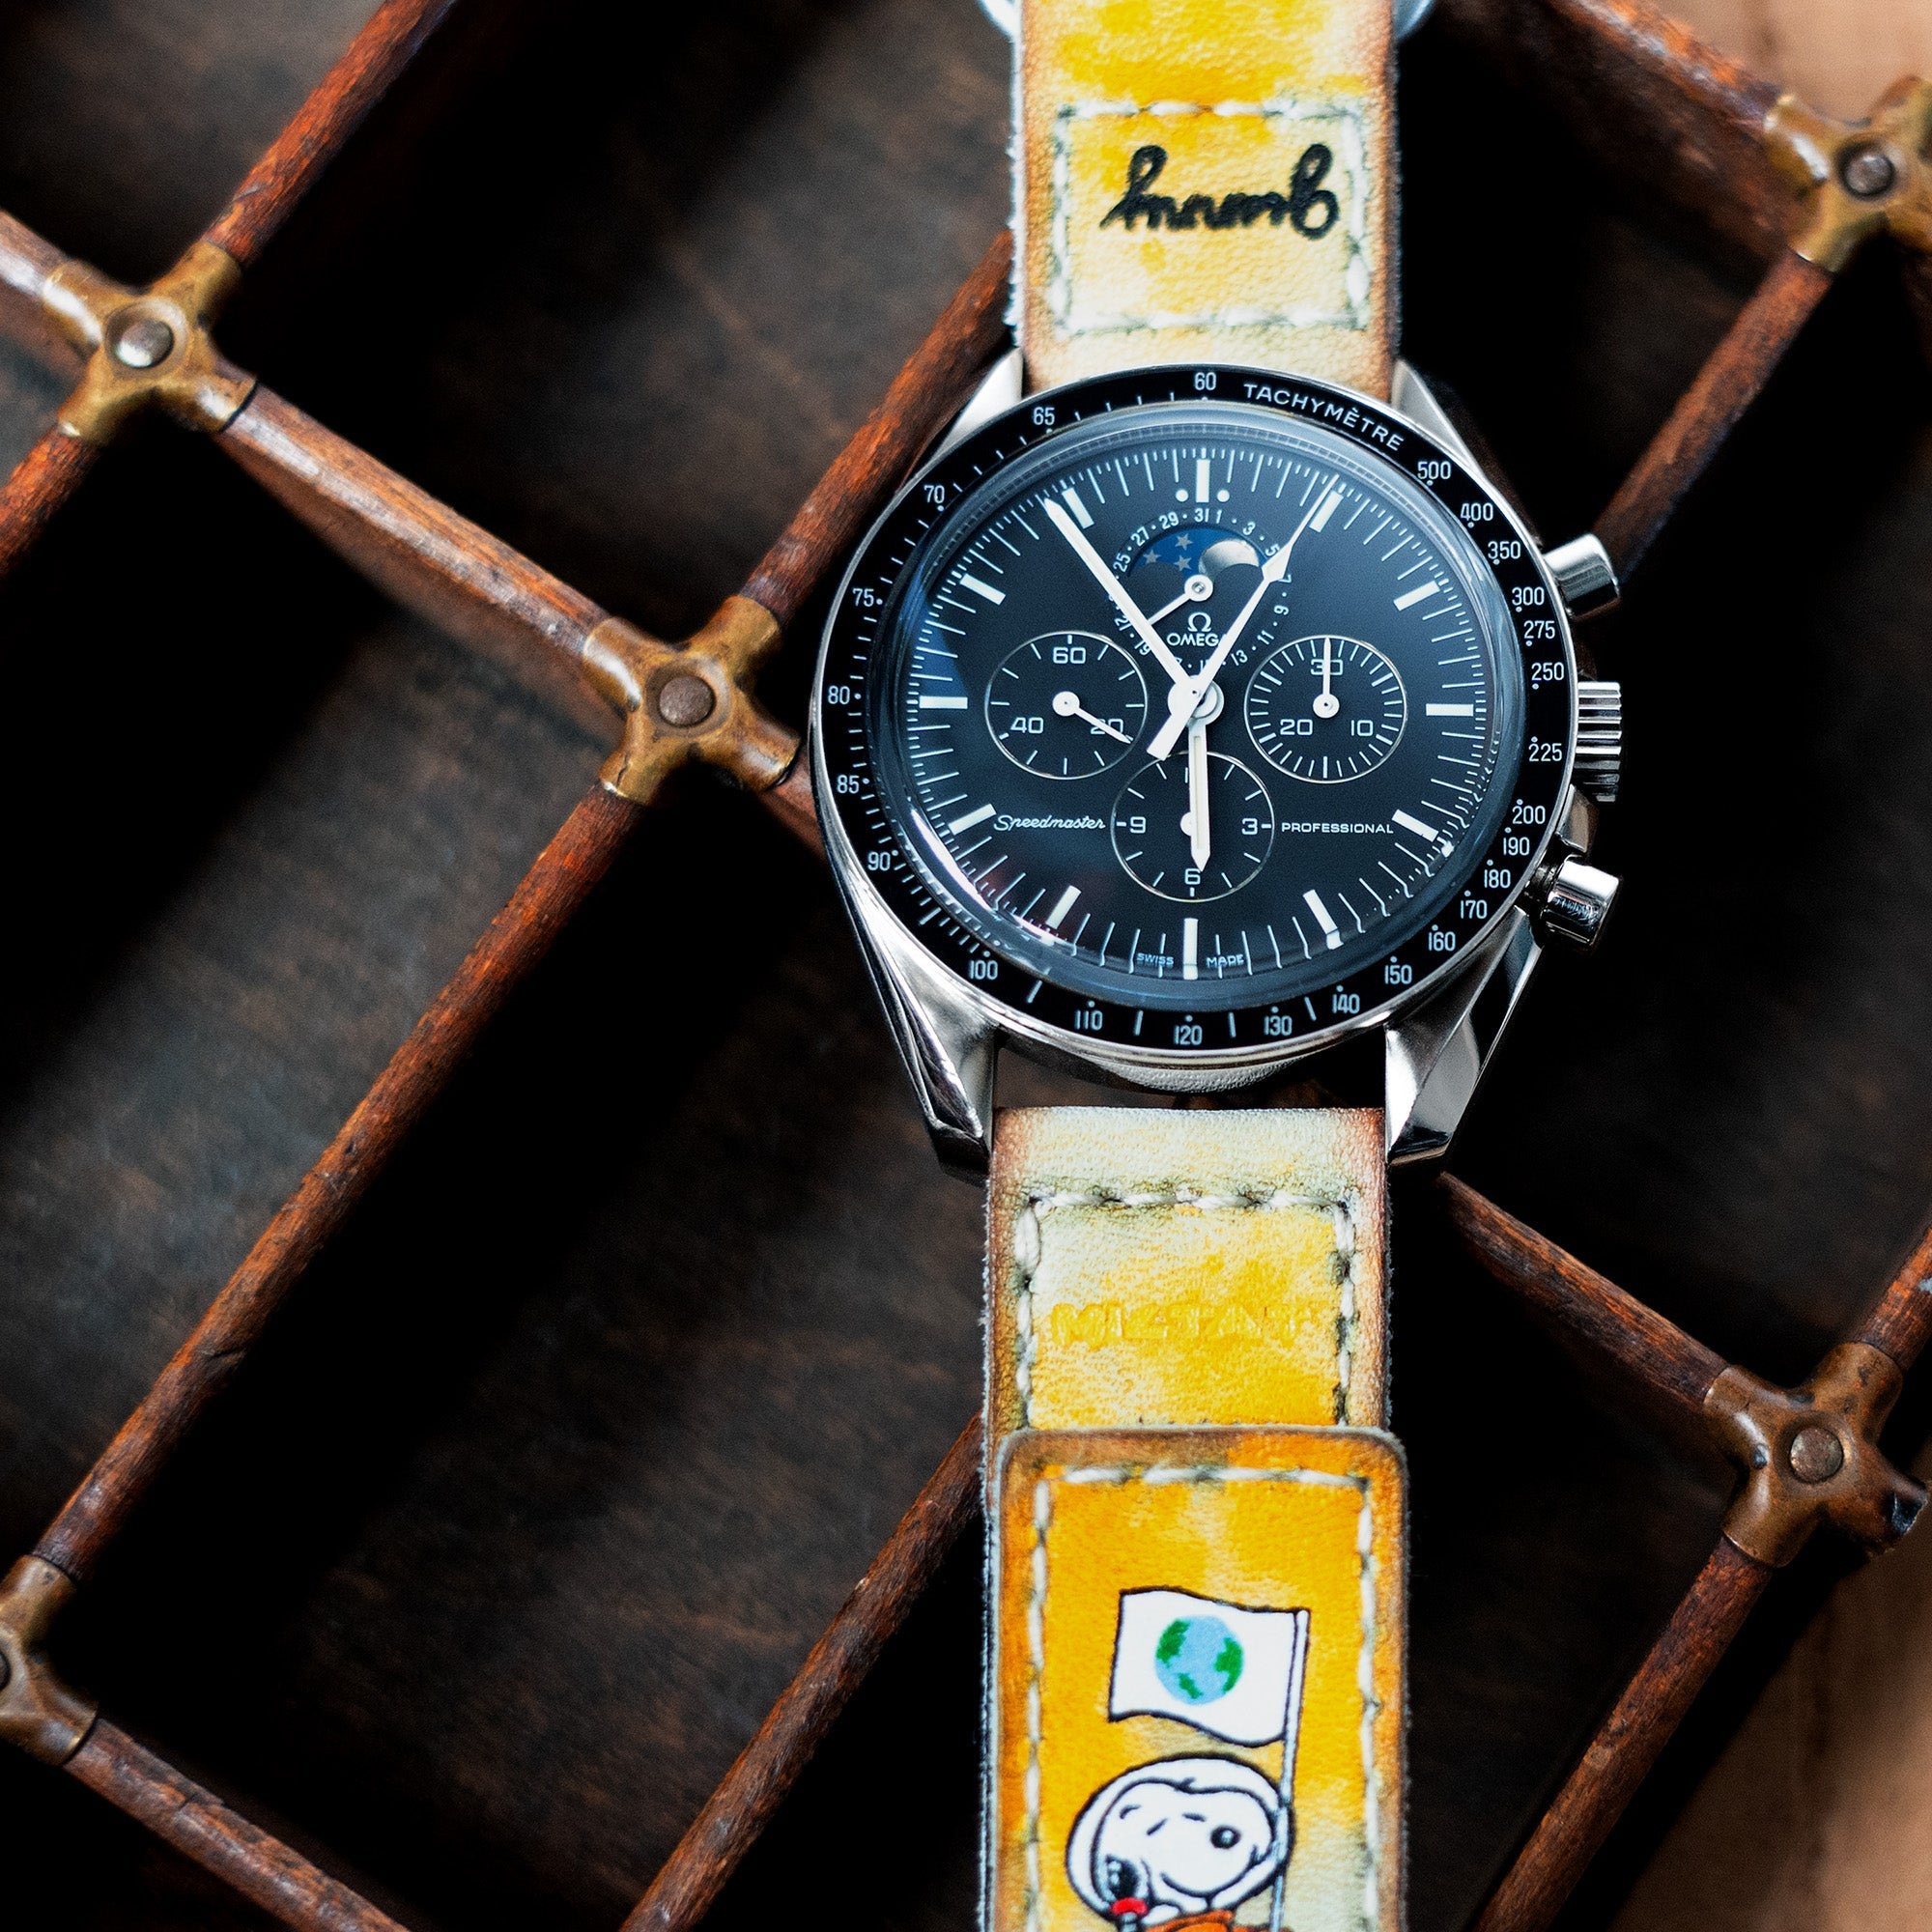 20mm Dirty Yellow Gunny X MT Moonswatch Q.R. Velcro Leather Watch Strap - Minimalist Snoopy Strapcode Watch Bands